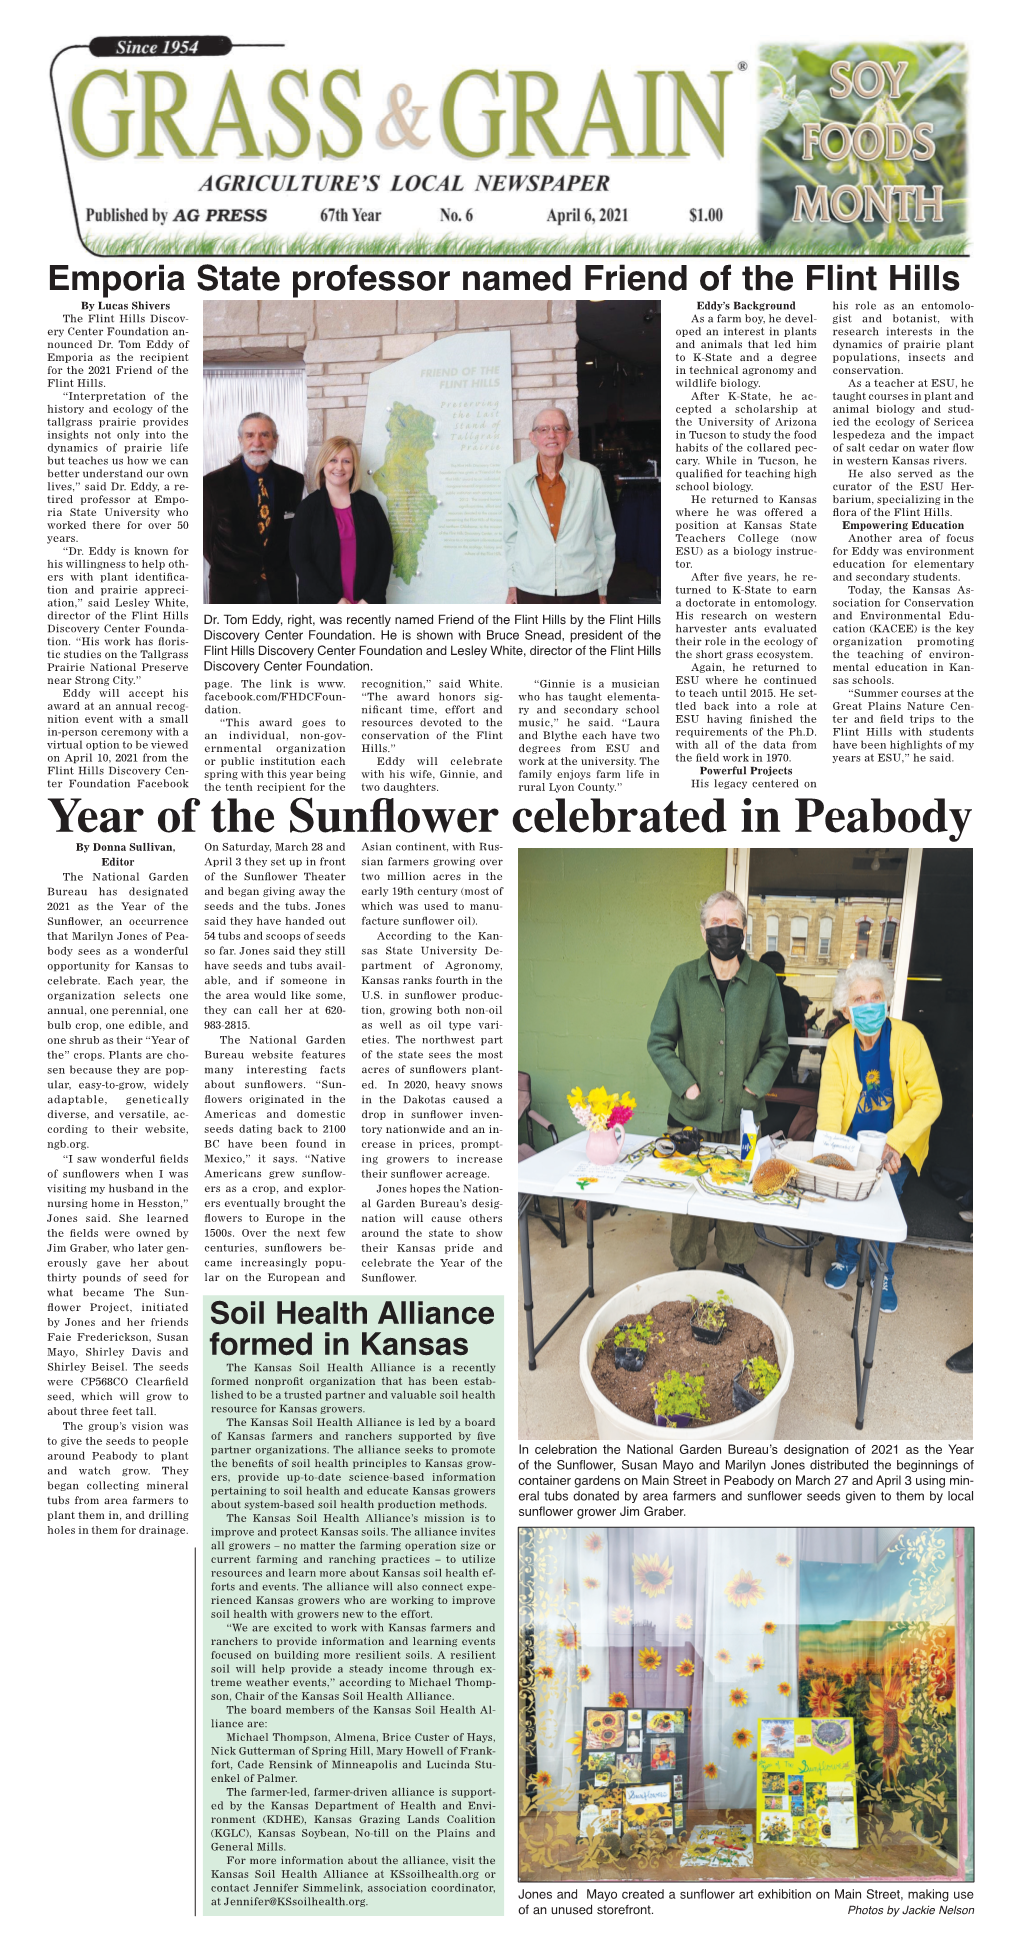 Year of the Sunflower Celebrated in Peabody